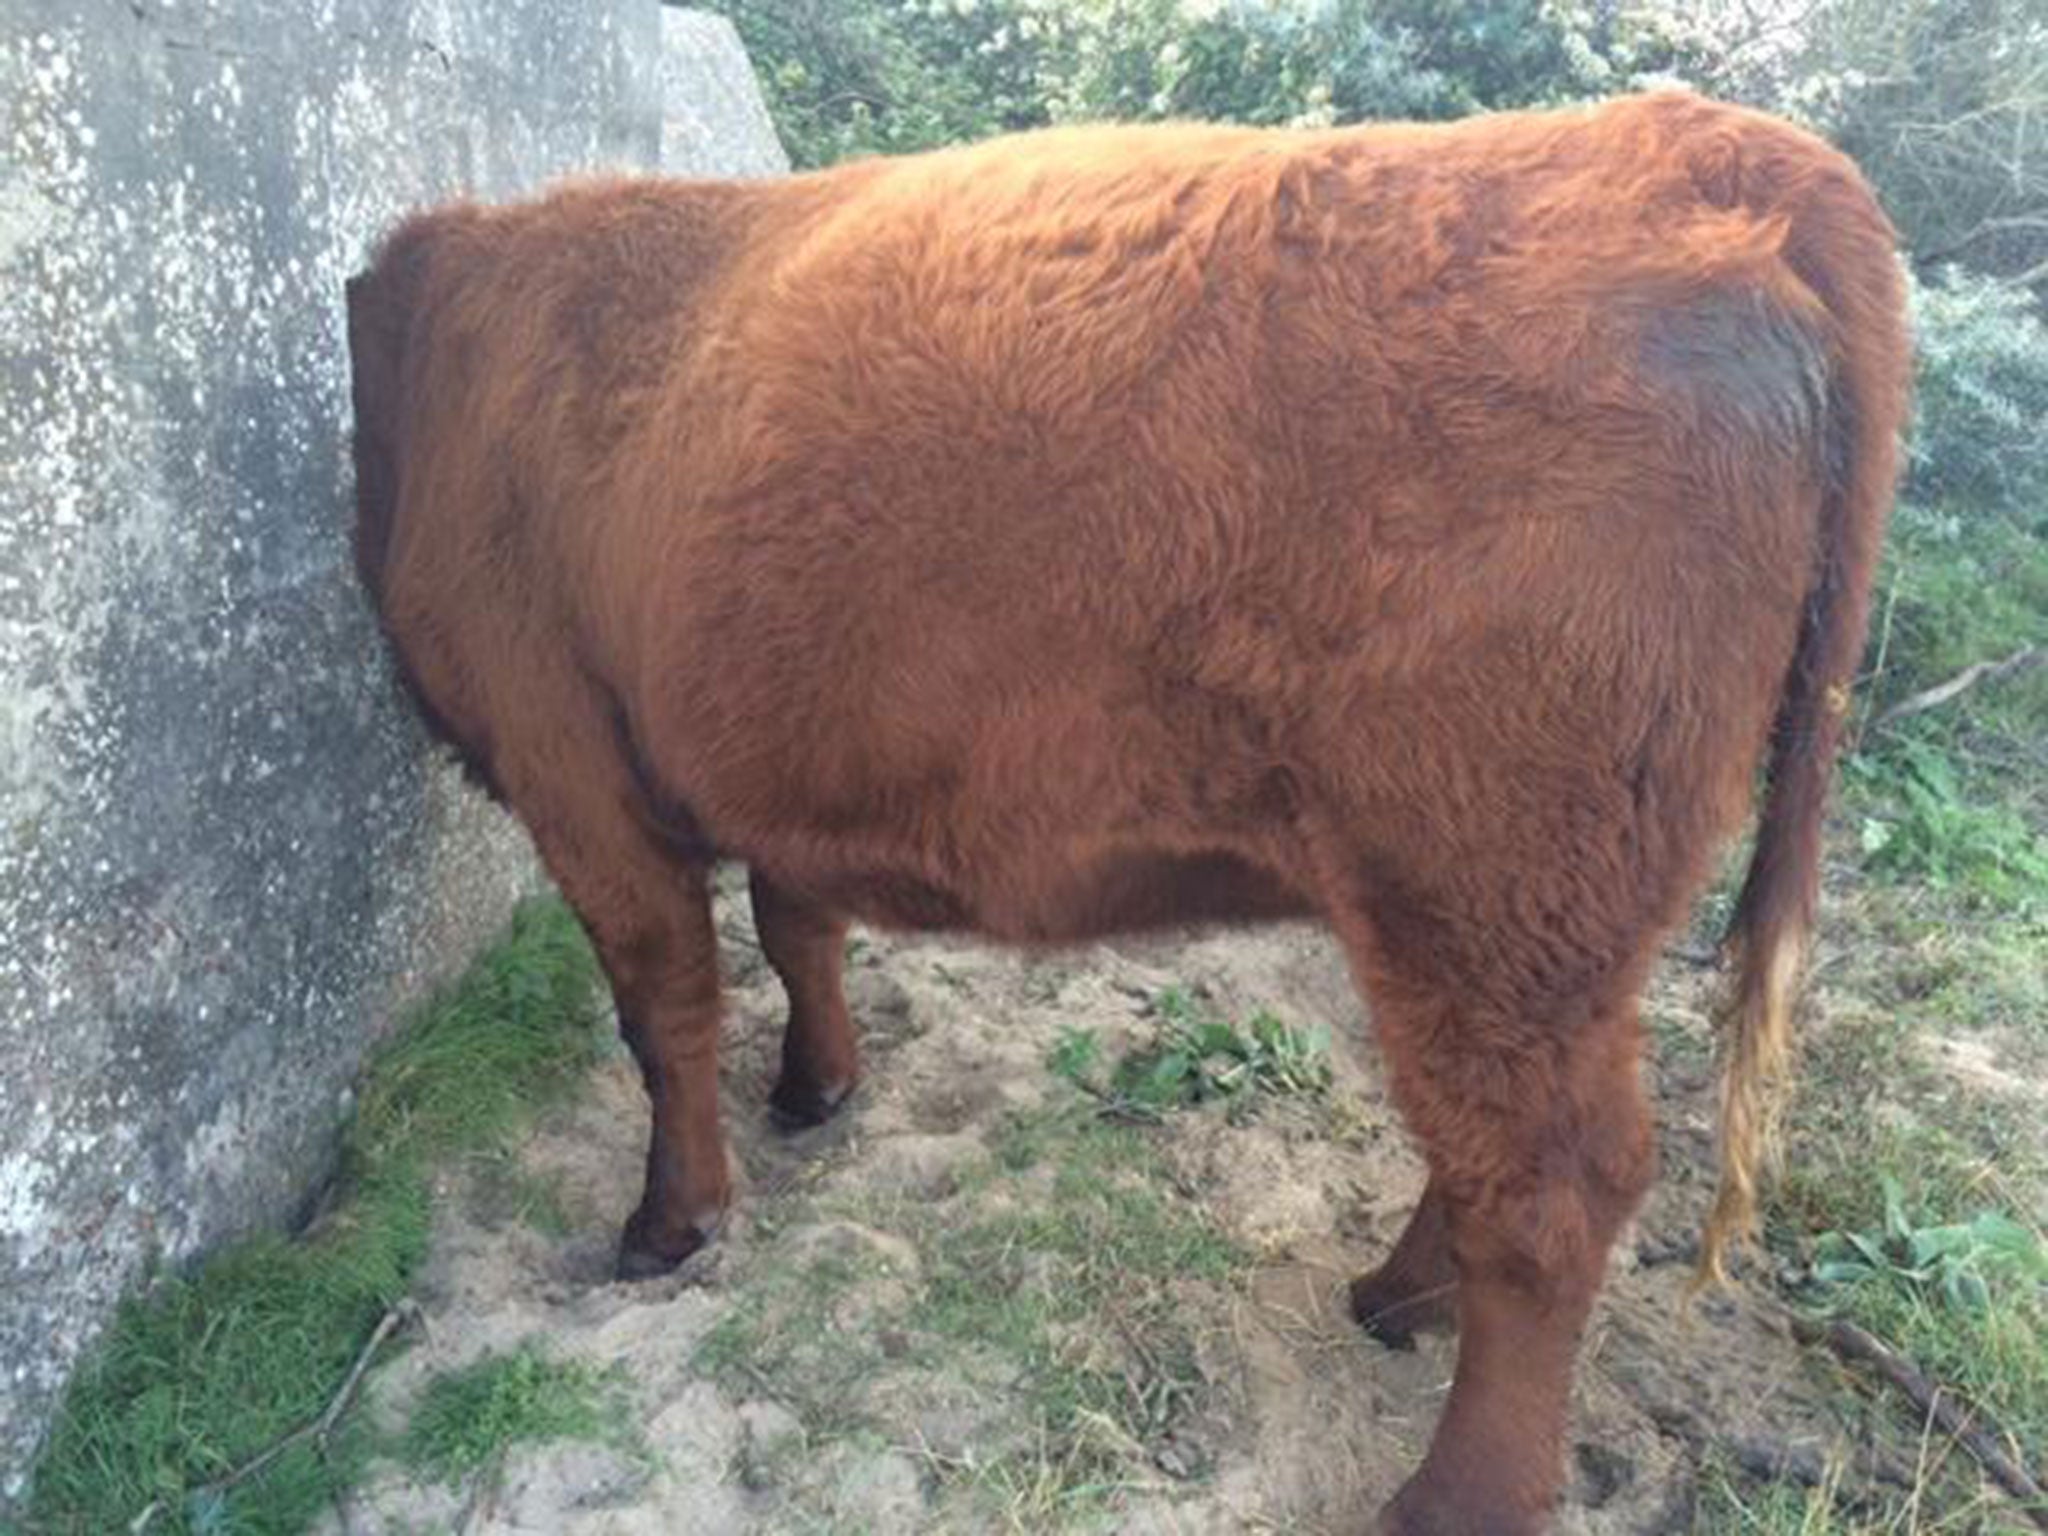 The cow got its head stuck in a pillbox at Gibraltar Point in Skegness.